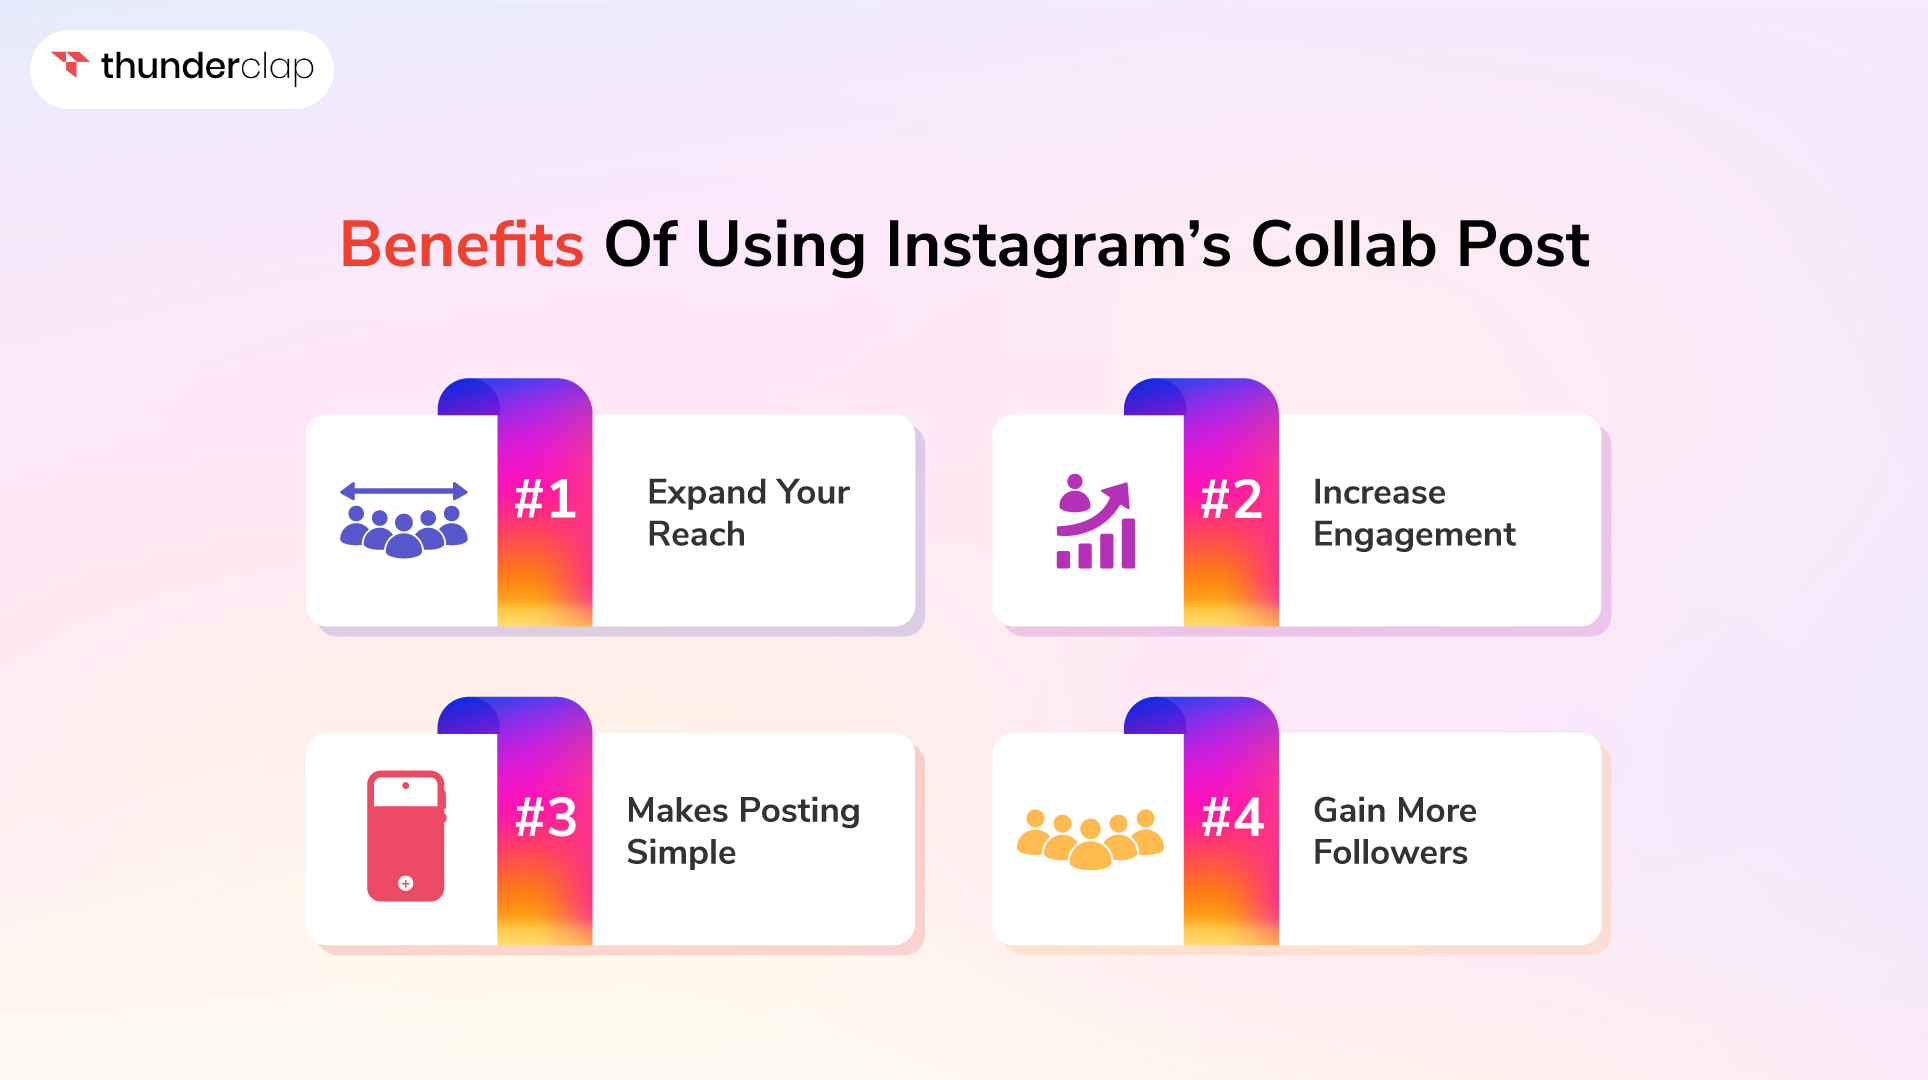 Benefits Of Using Instagram Collaboration Post